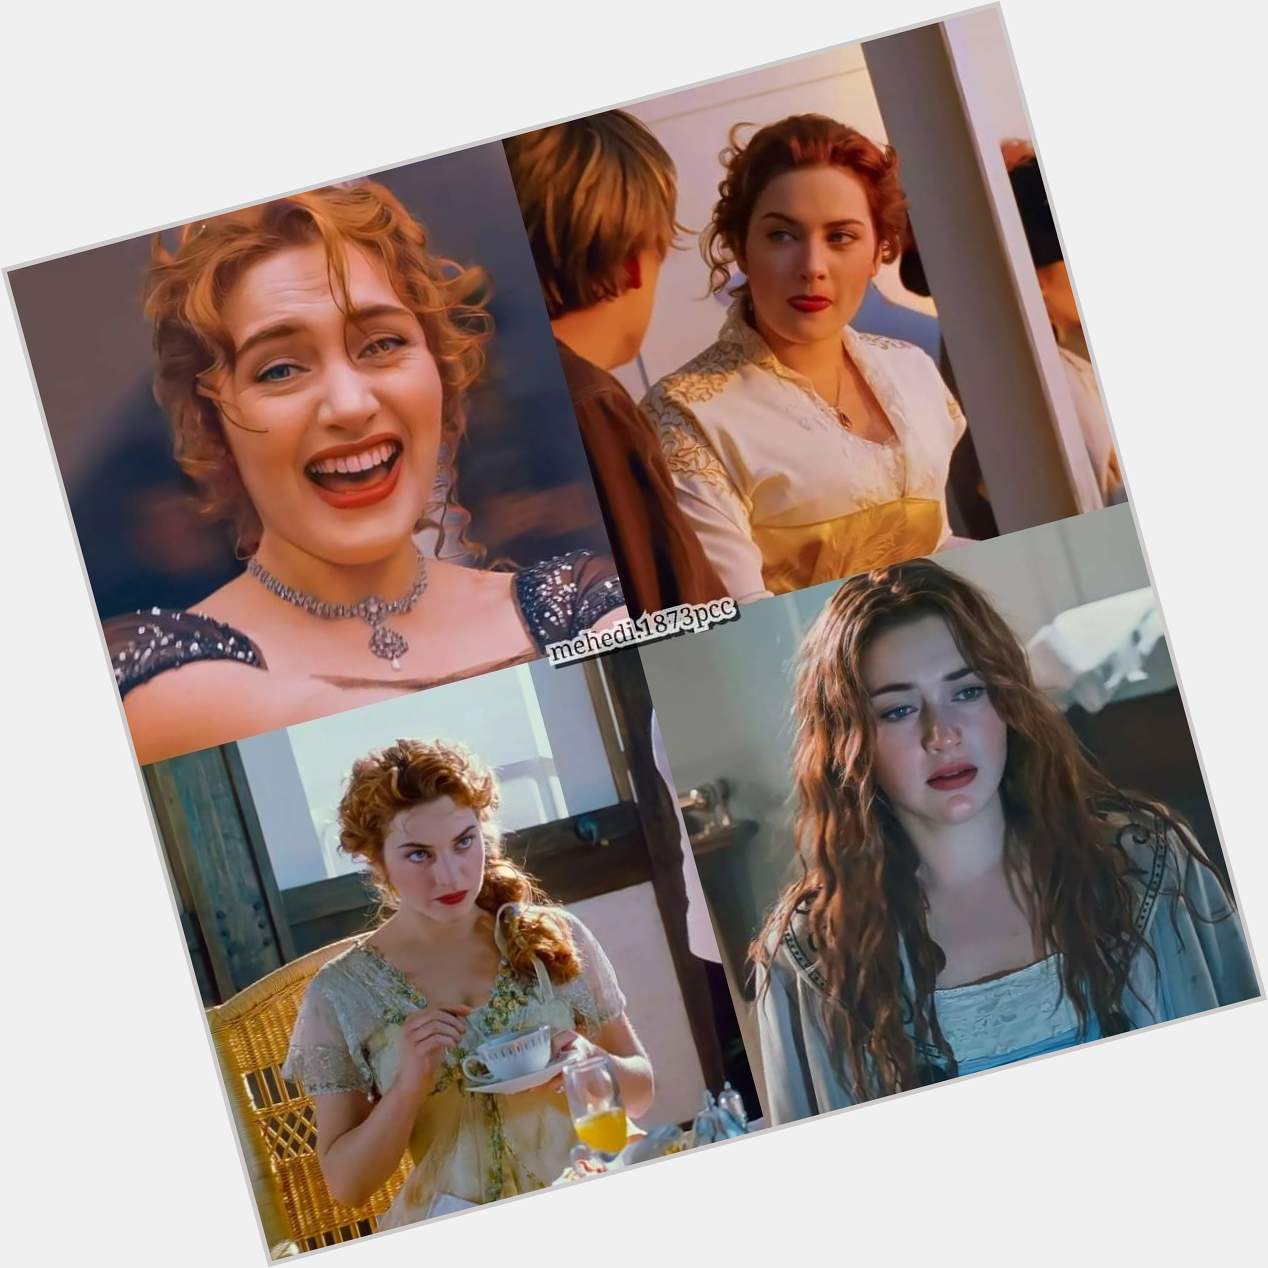 Happy 46th birthday to kate winslet <3
.
.
.
.
.
.     